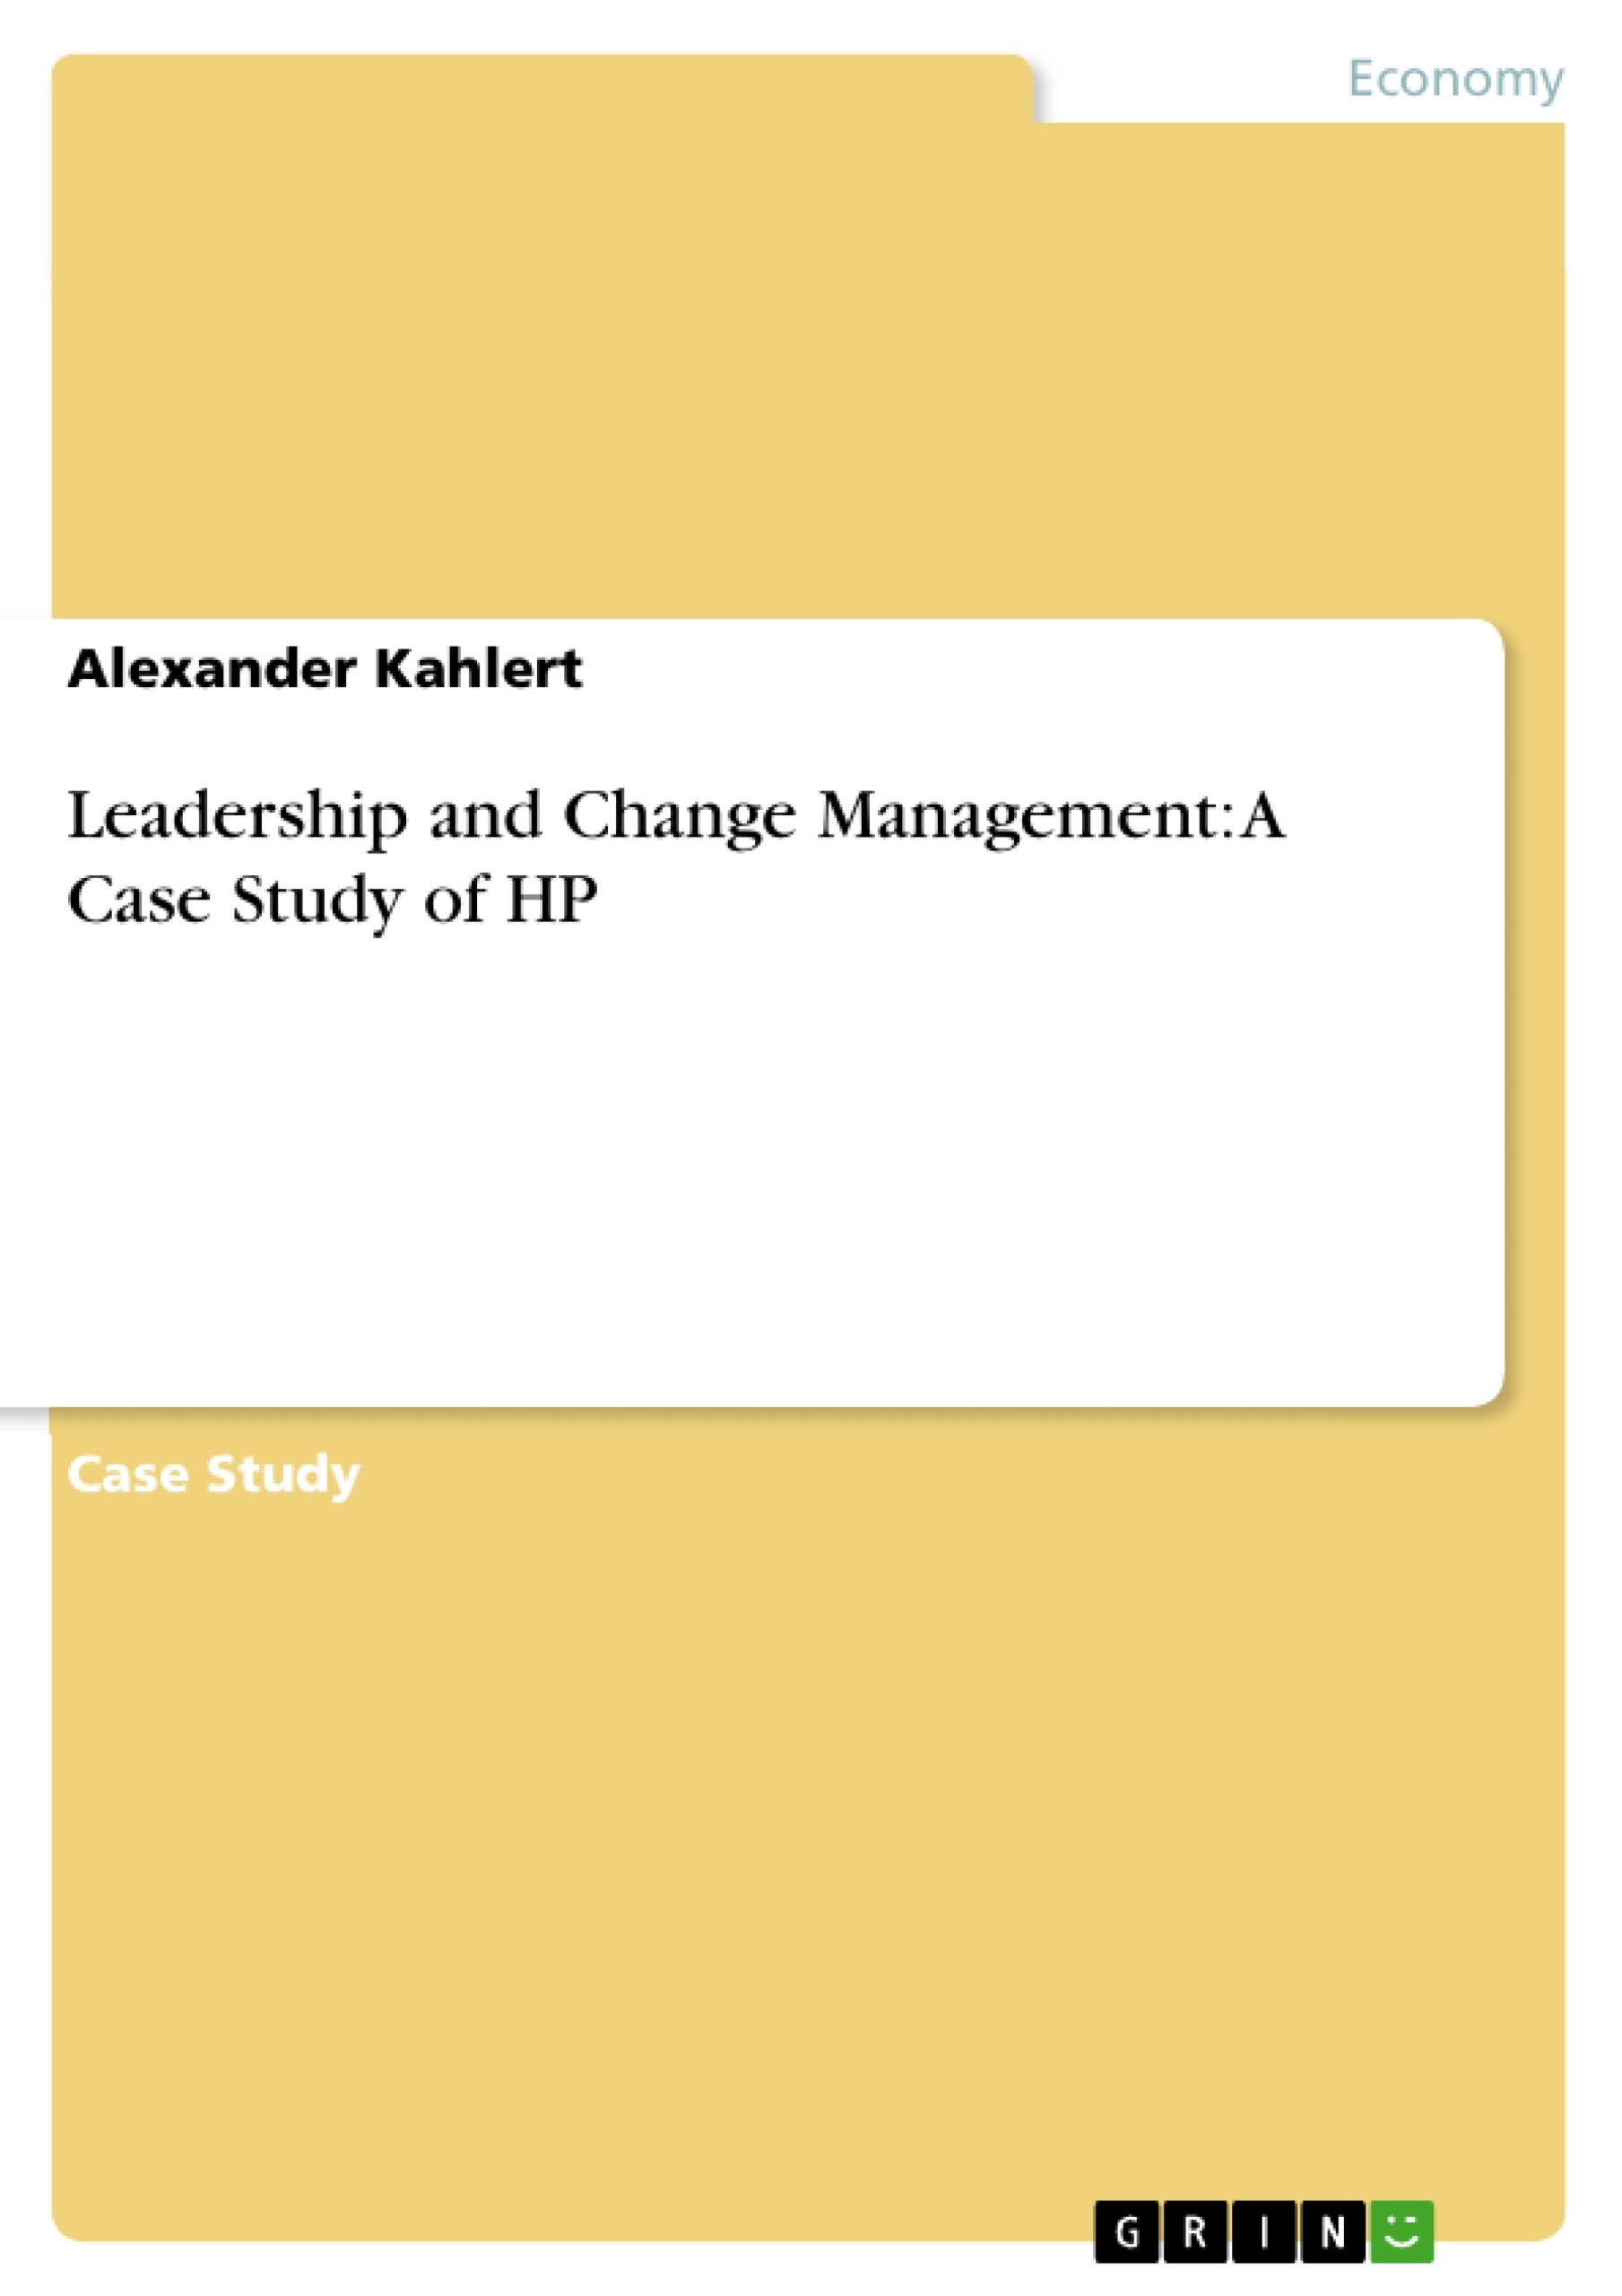 Title: Leadership and Change Management: A Case Study of HP